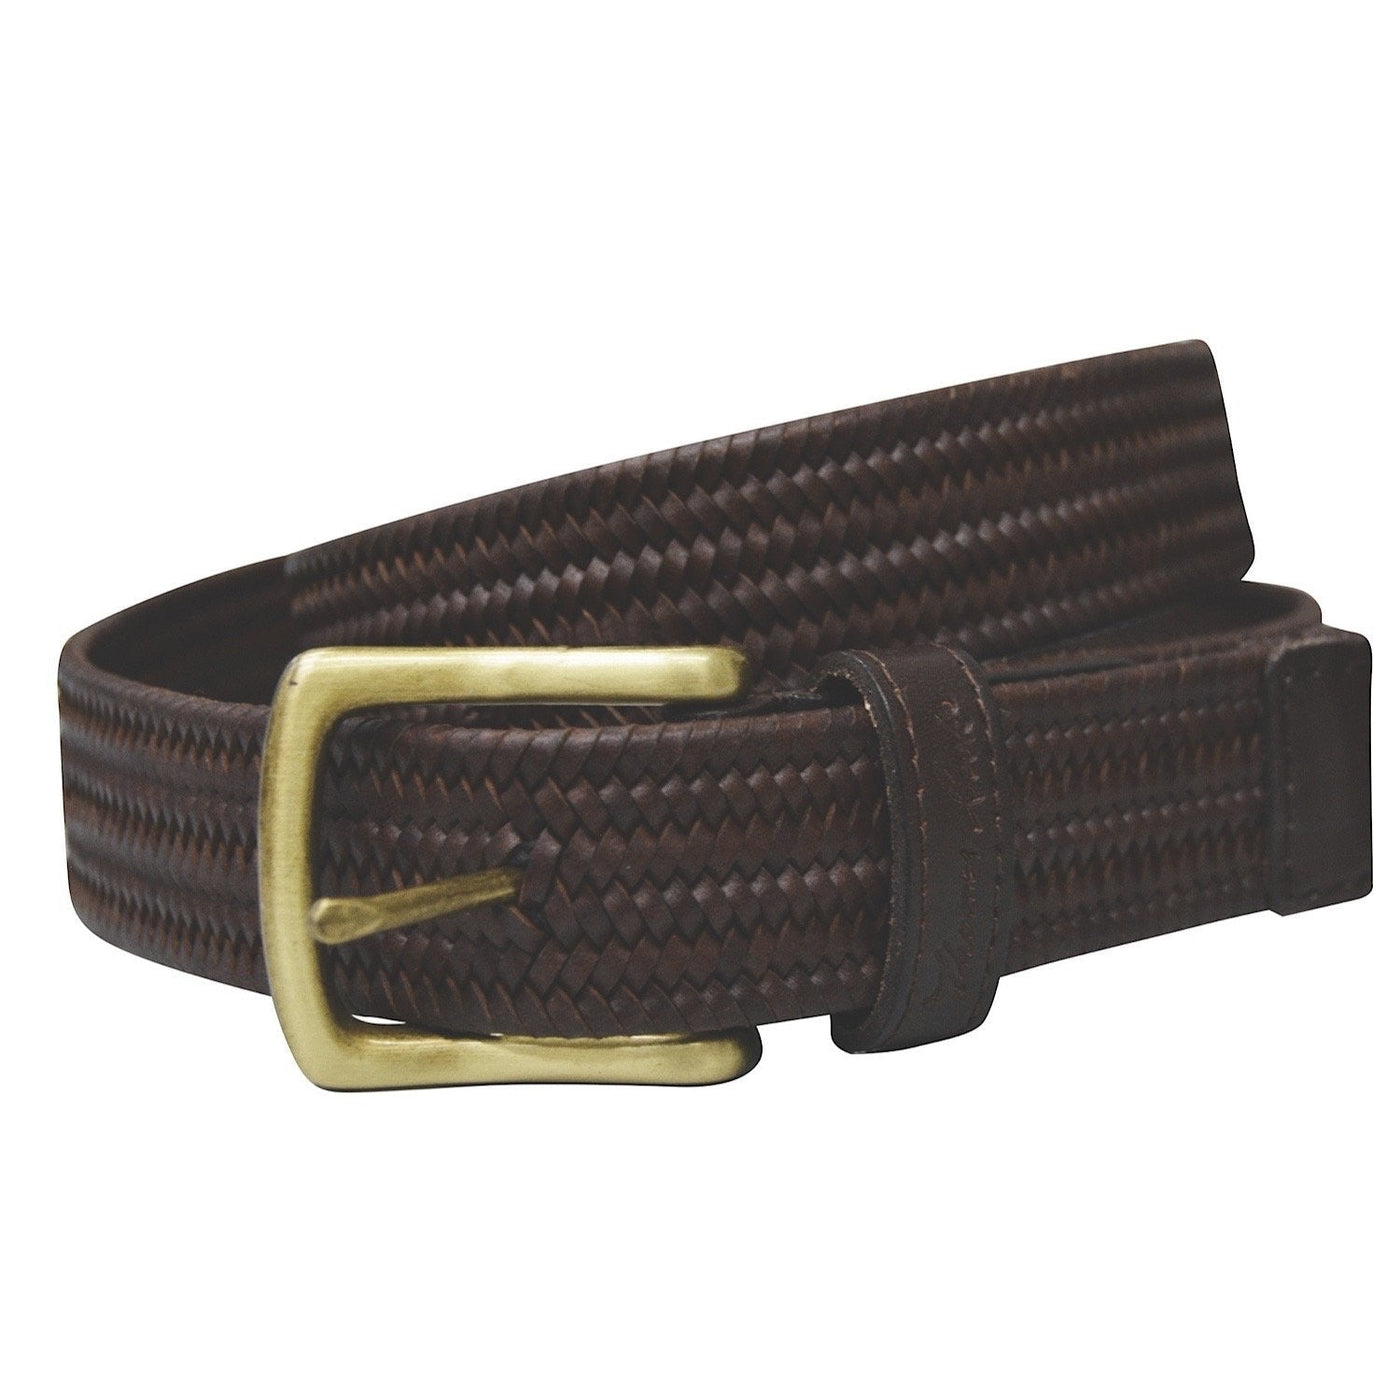 THOMAS COOK BOOTS AND CLOTHING Belts TCP1935BEL Stretch Leather Belt